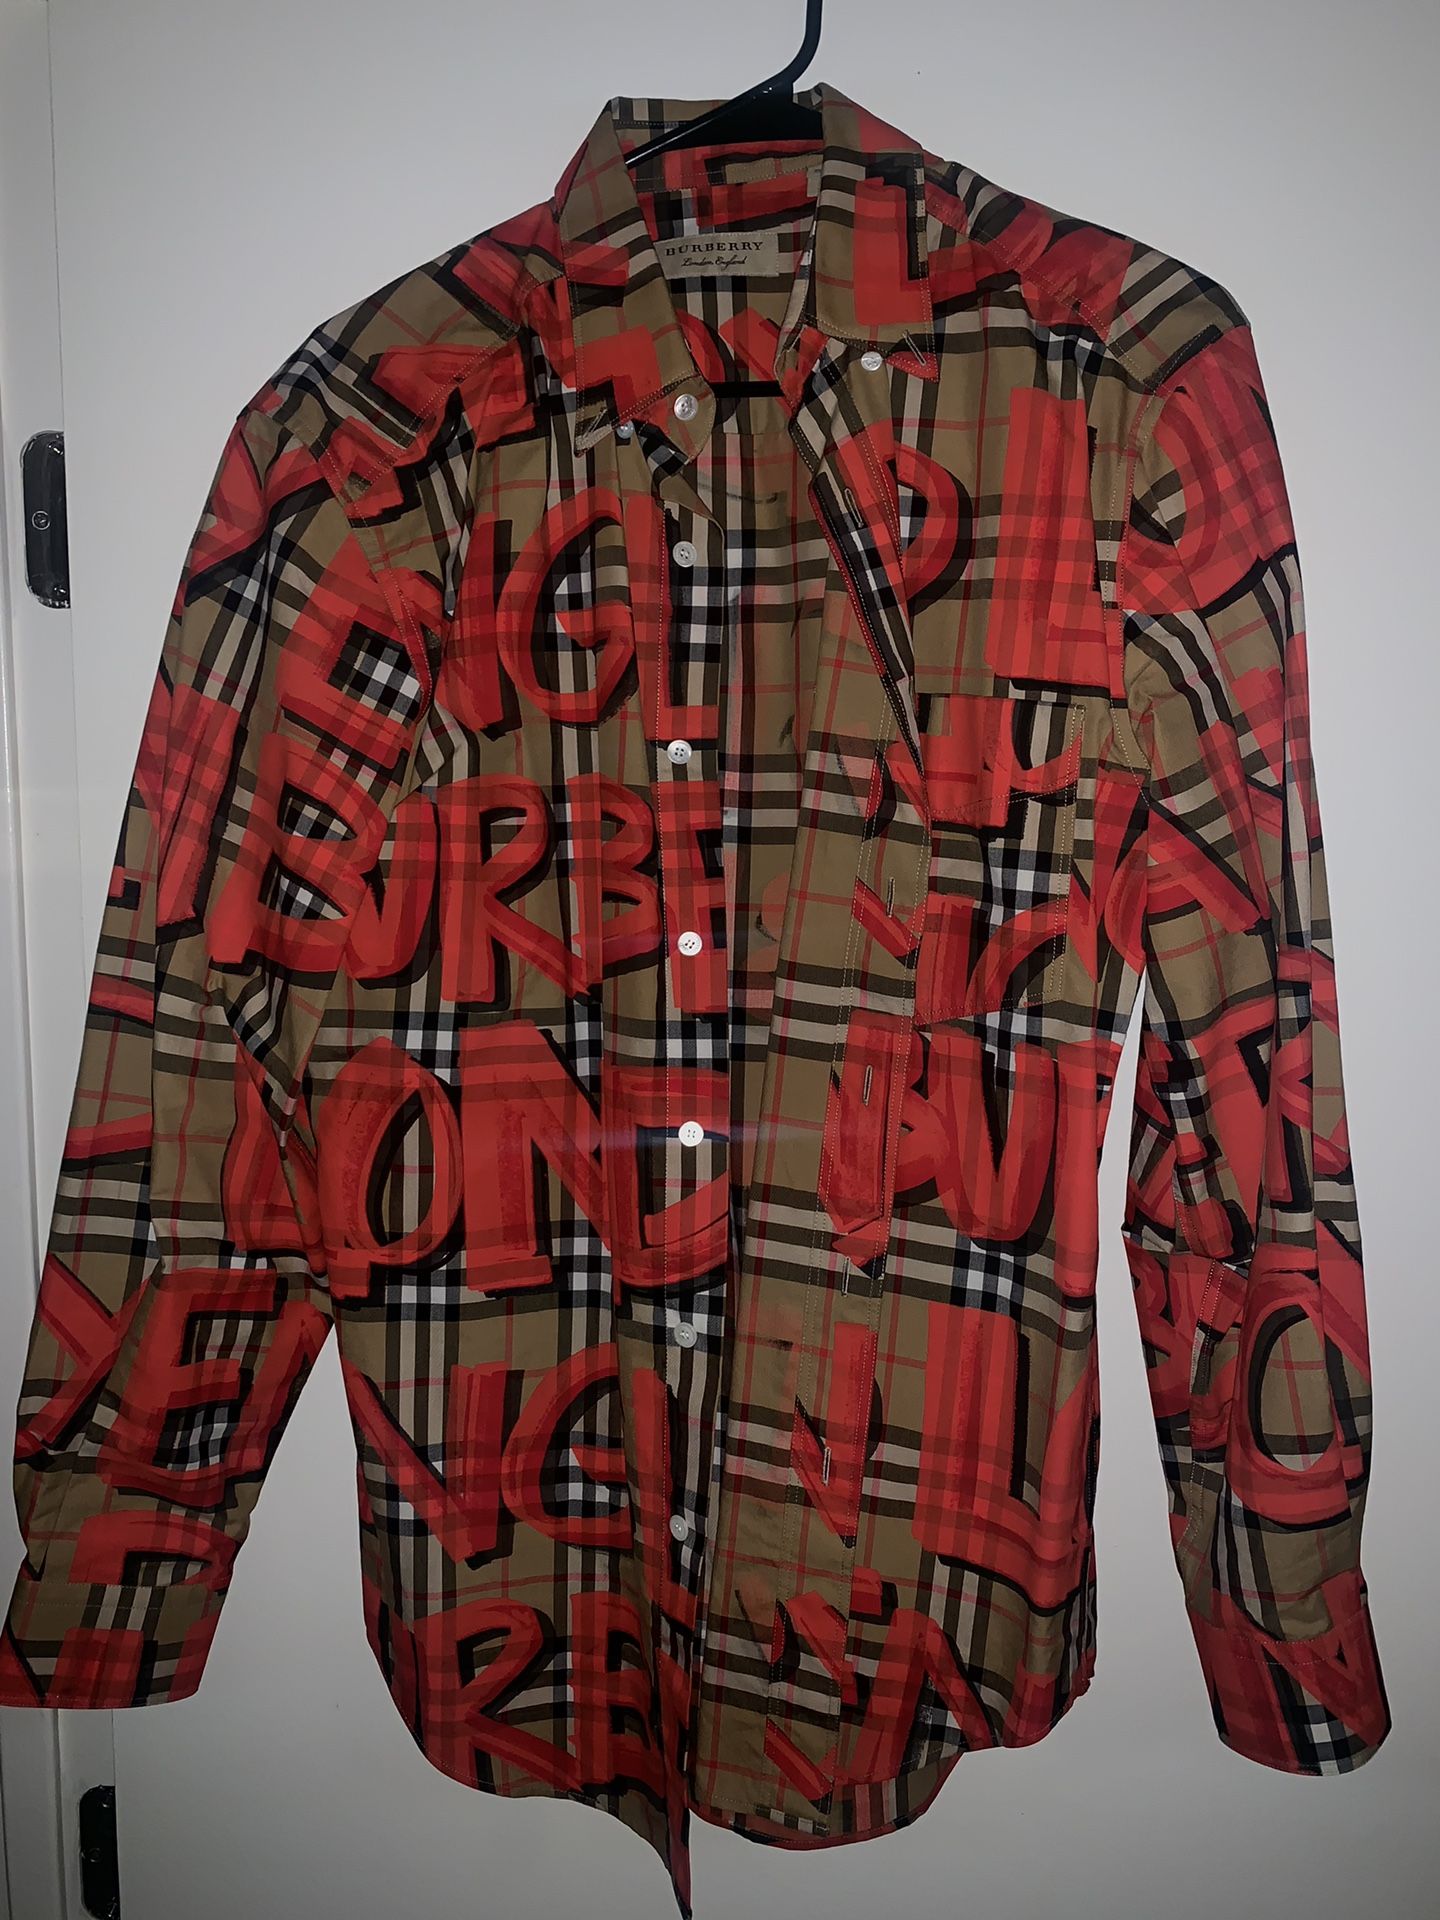 Brand New Men’s Burberry Shirt (Size Small)-$280